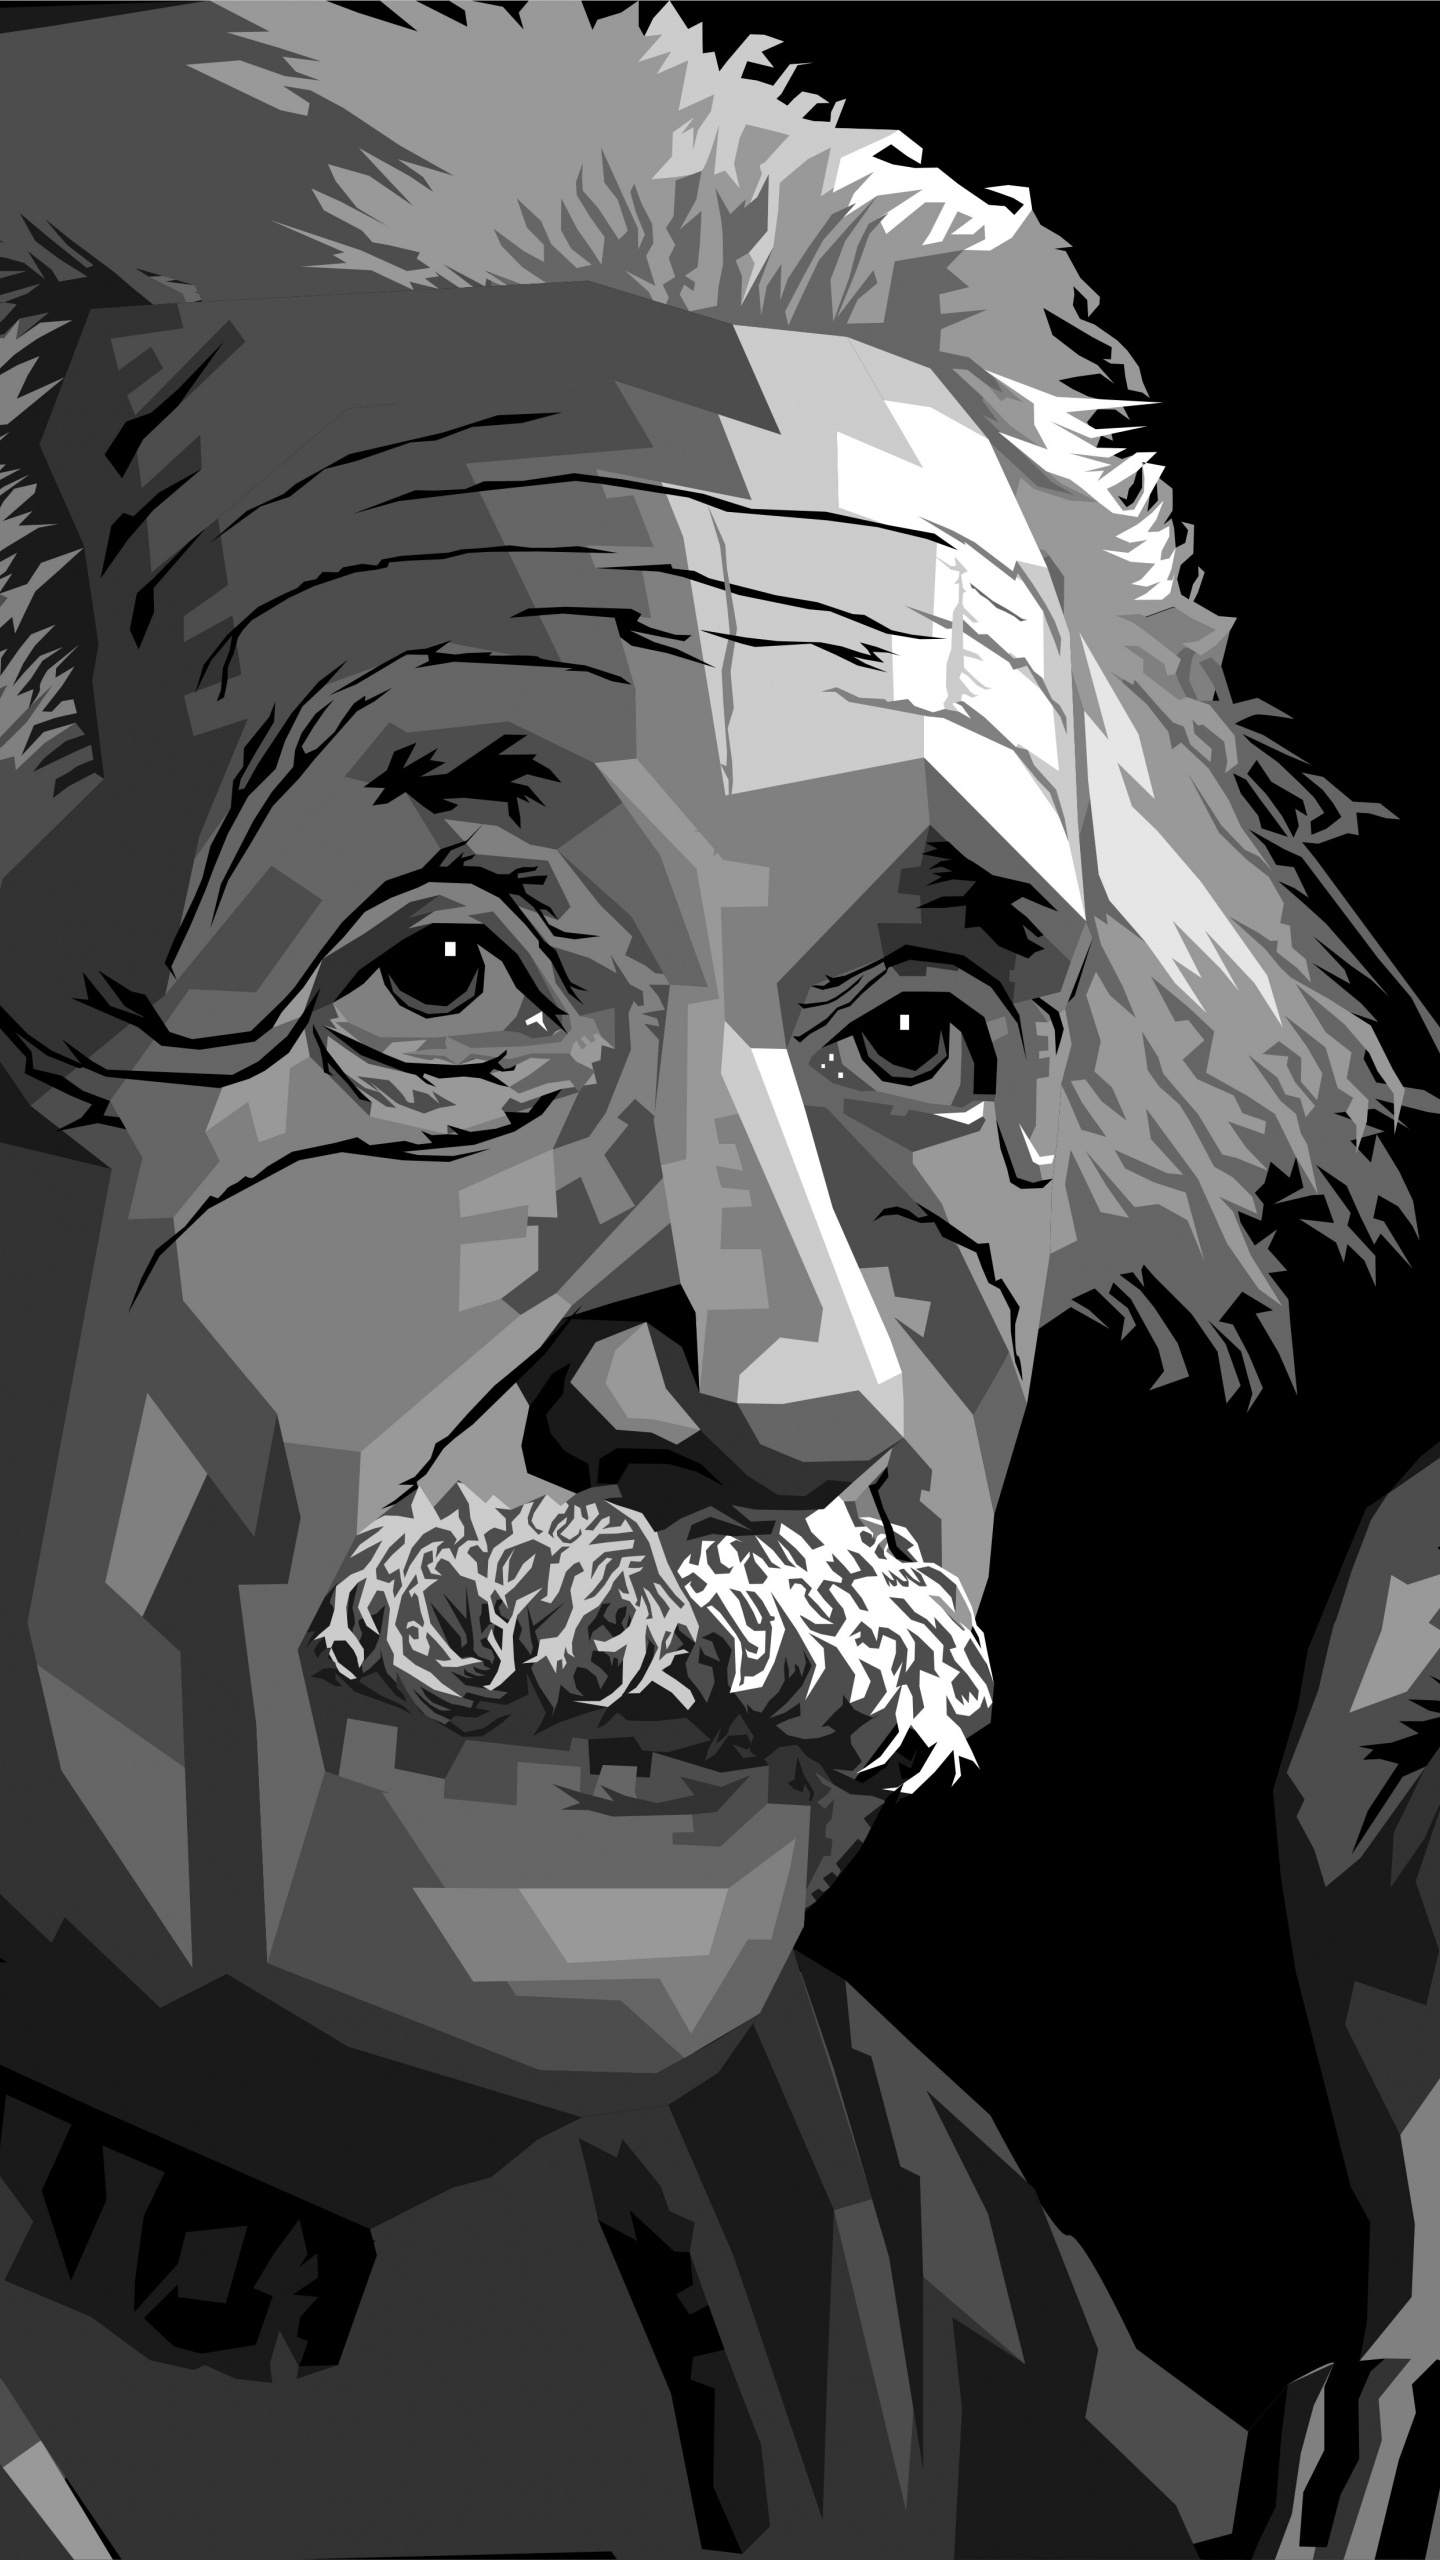 Einstein: Received the 1921 Nobel Prize in Physics "for his services to theoretical physics, and especially for his discovery of the law of the photoelectric effect", a pivotal step in the development of quantum theory. 1440x2560 HD Wallpaper.